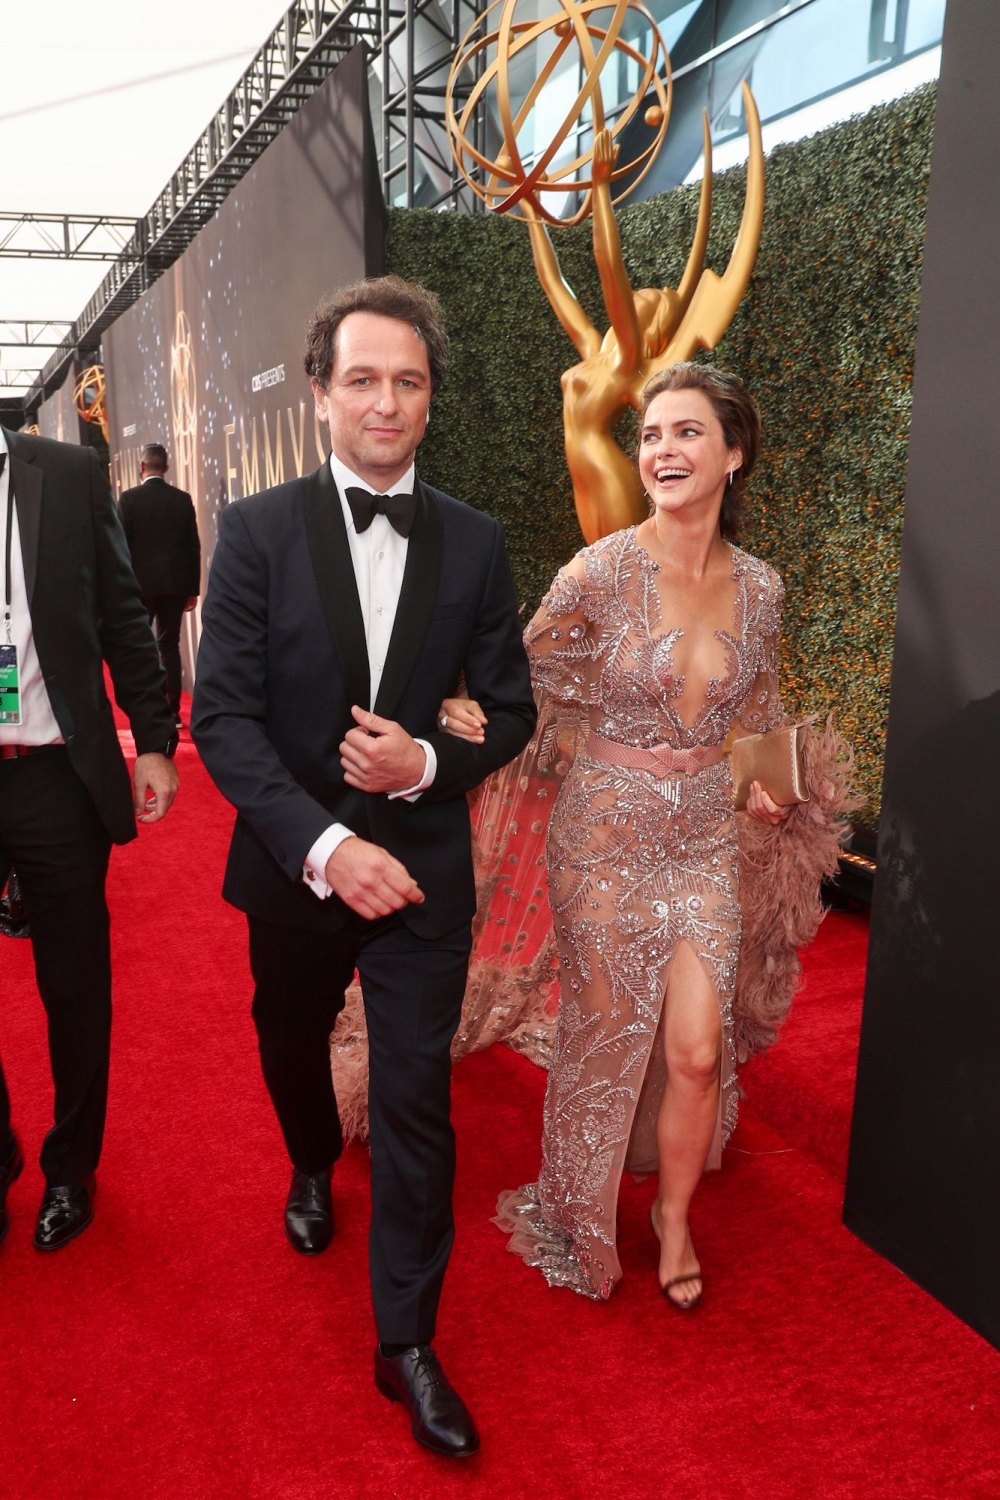 Matthew Rhys Reveals How His Romance With Keri Russell Was Exposed on 'The Americans' Set